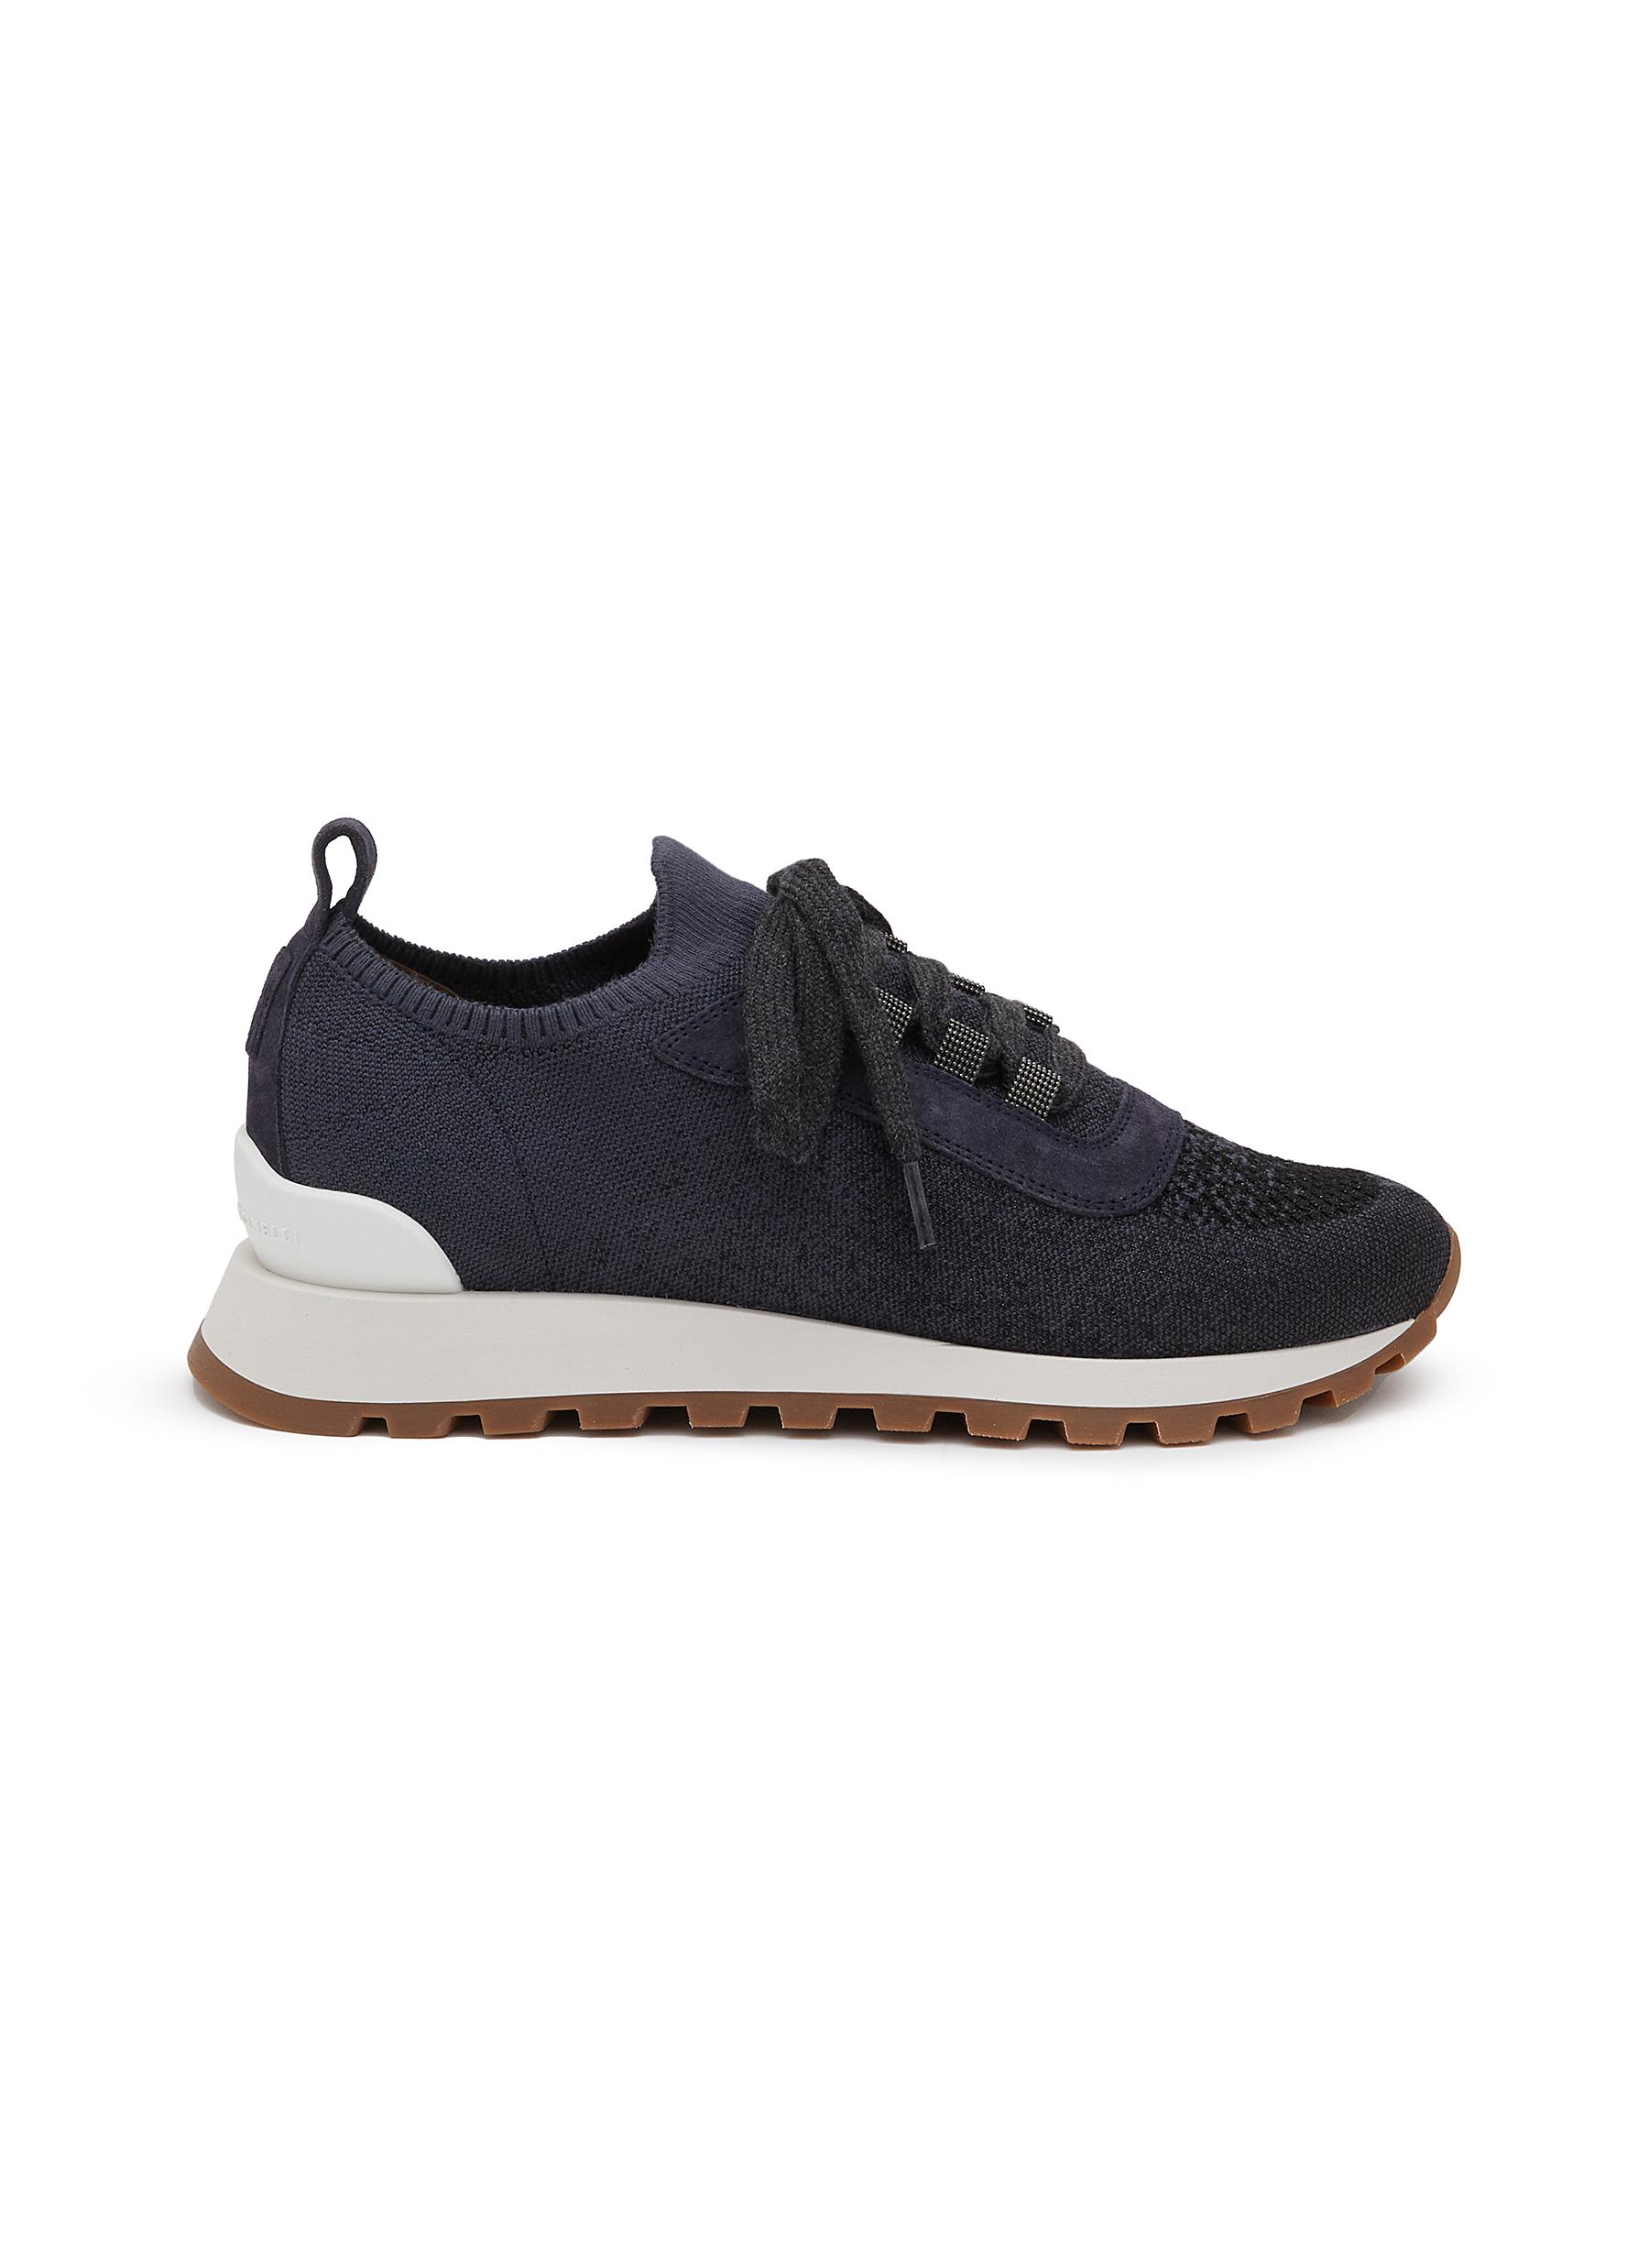 BRUNELLO CUCINELLI | Monili Knit Low Top Lace Up Sneakers | NAVY | Women |  Lane Crawford